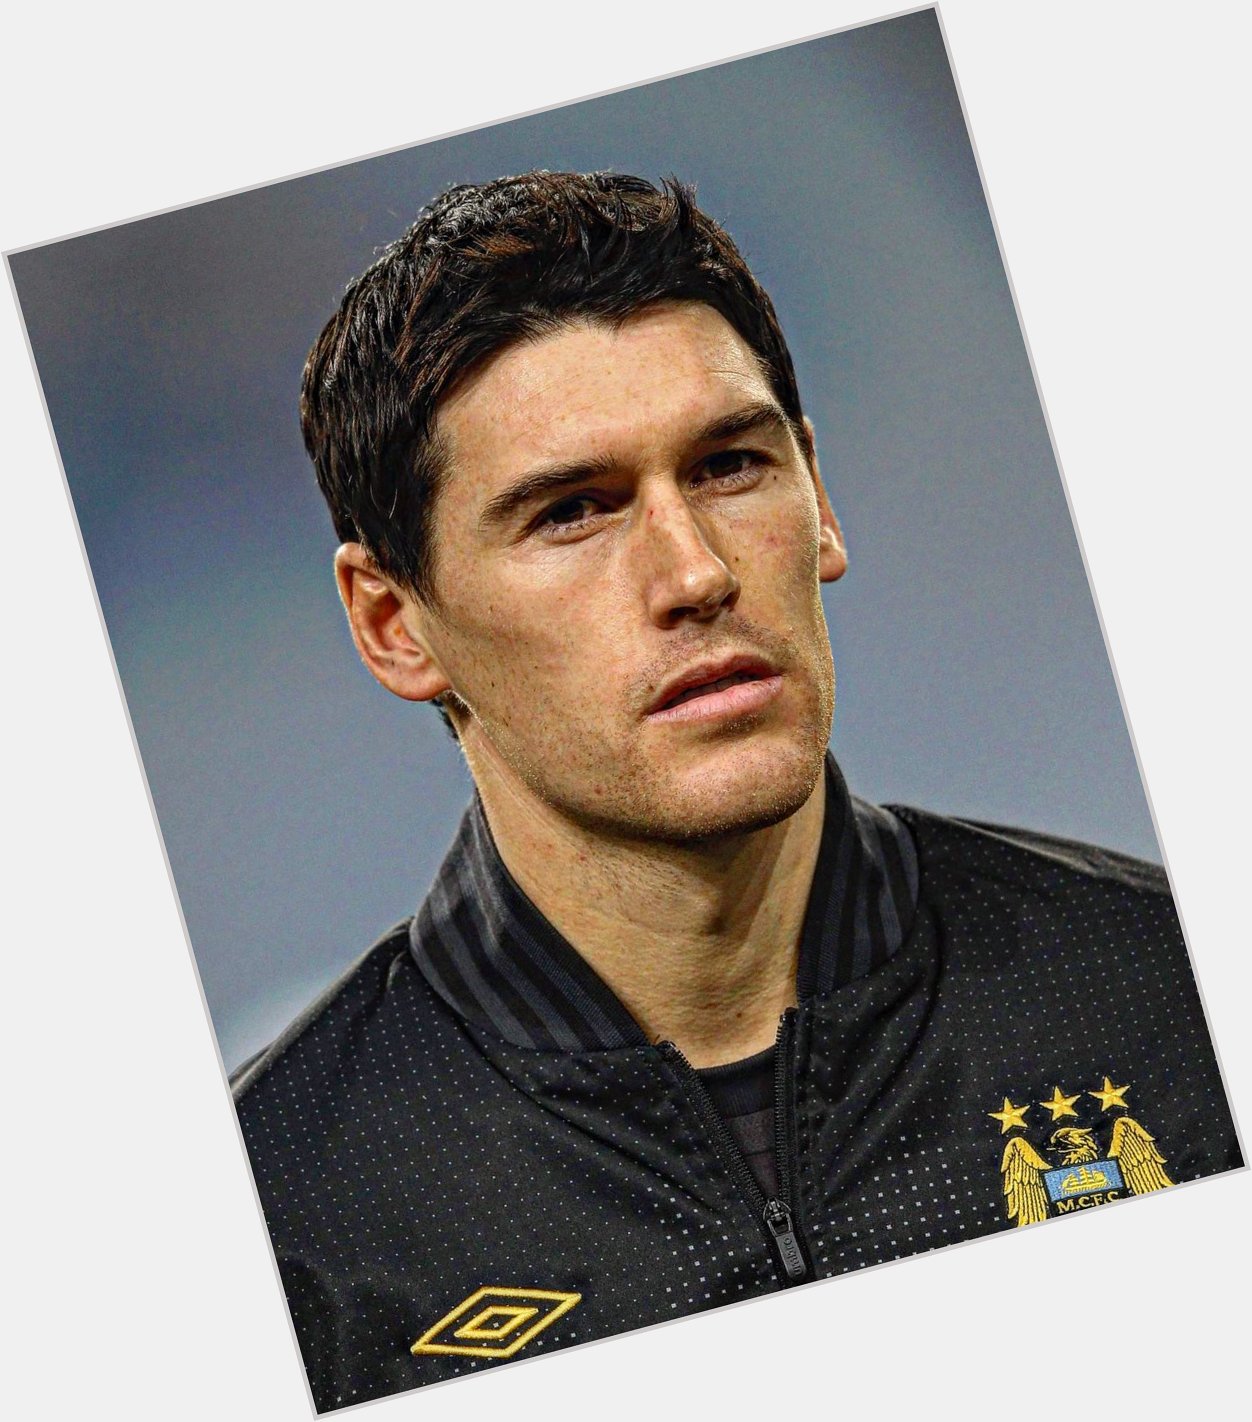 Happy birthday to Gareth Barry, who turns 42 today. 